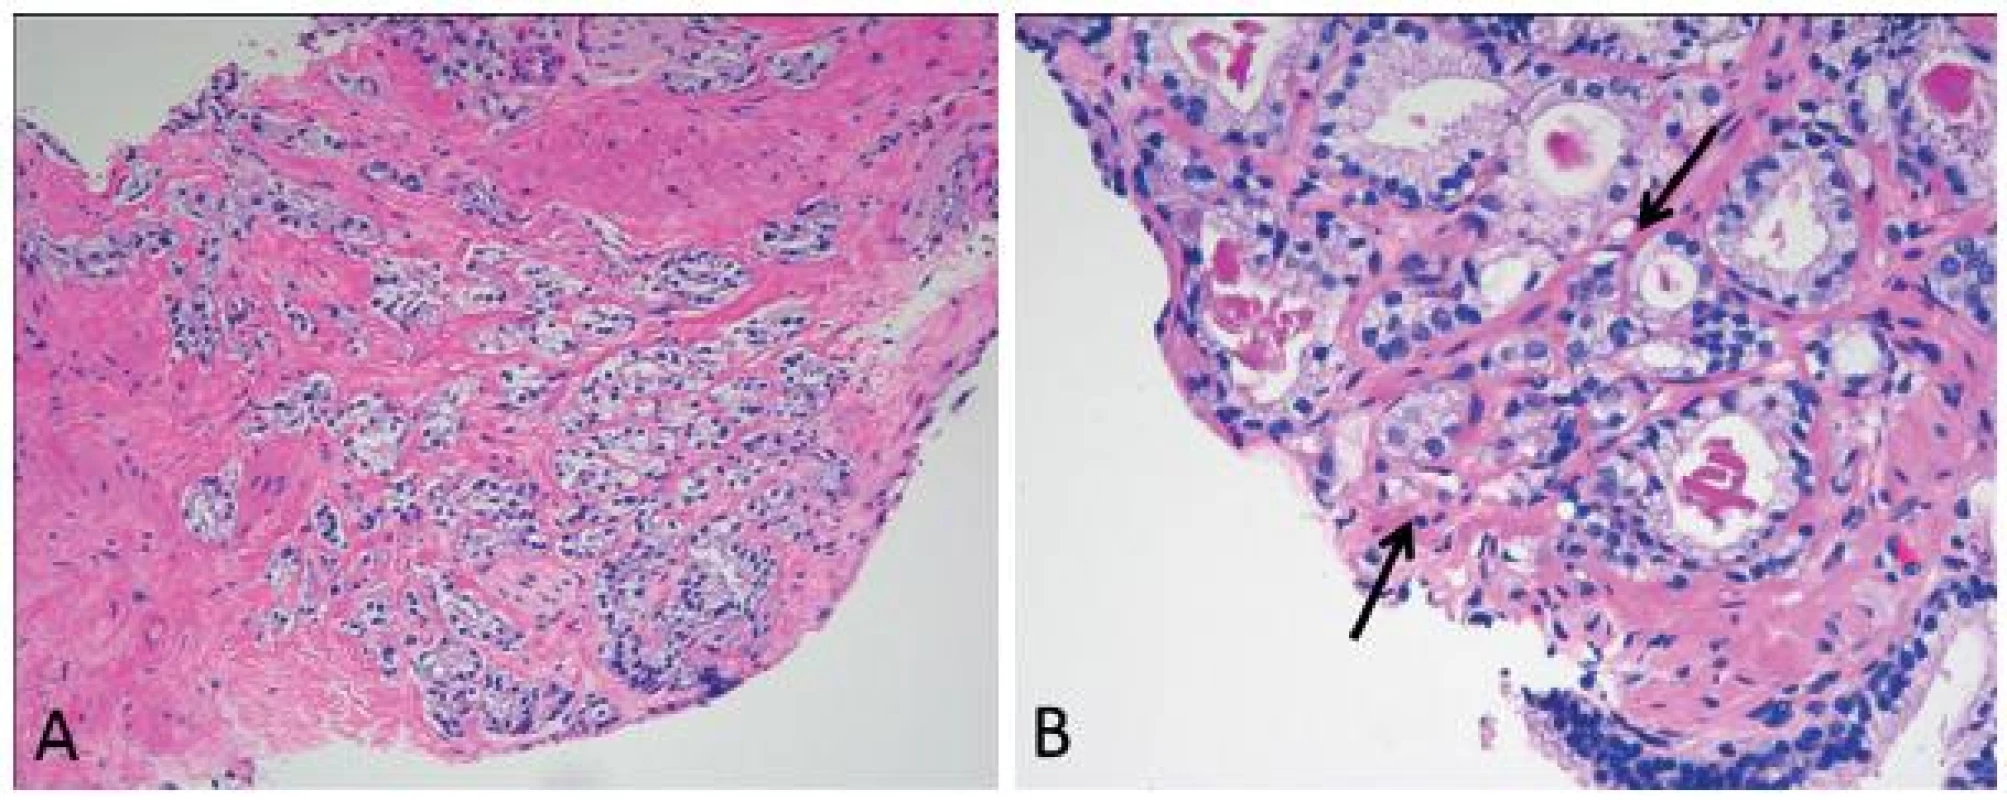 Grade 4 poorly formed glands (A) should be differentiated from small glands resulting from tangential sectioning (B, arrows). The latter typically encompasses only a few poorly formed glands that are adjacent to or intermingle with other well-formed small glands.